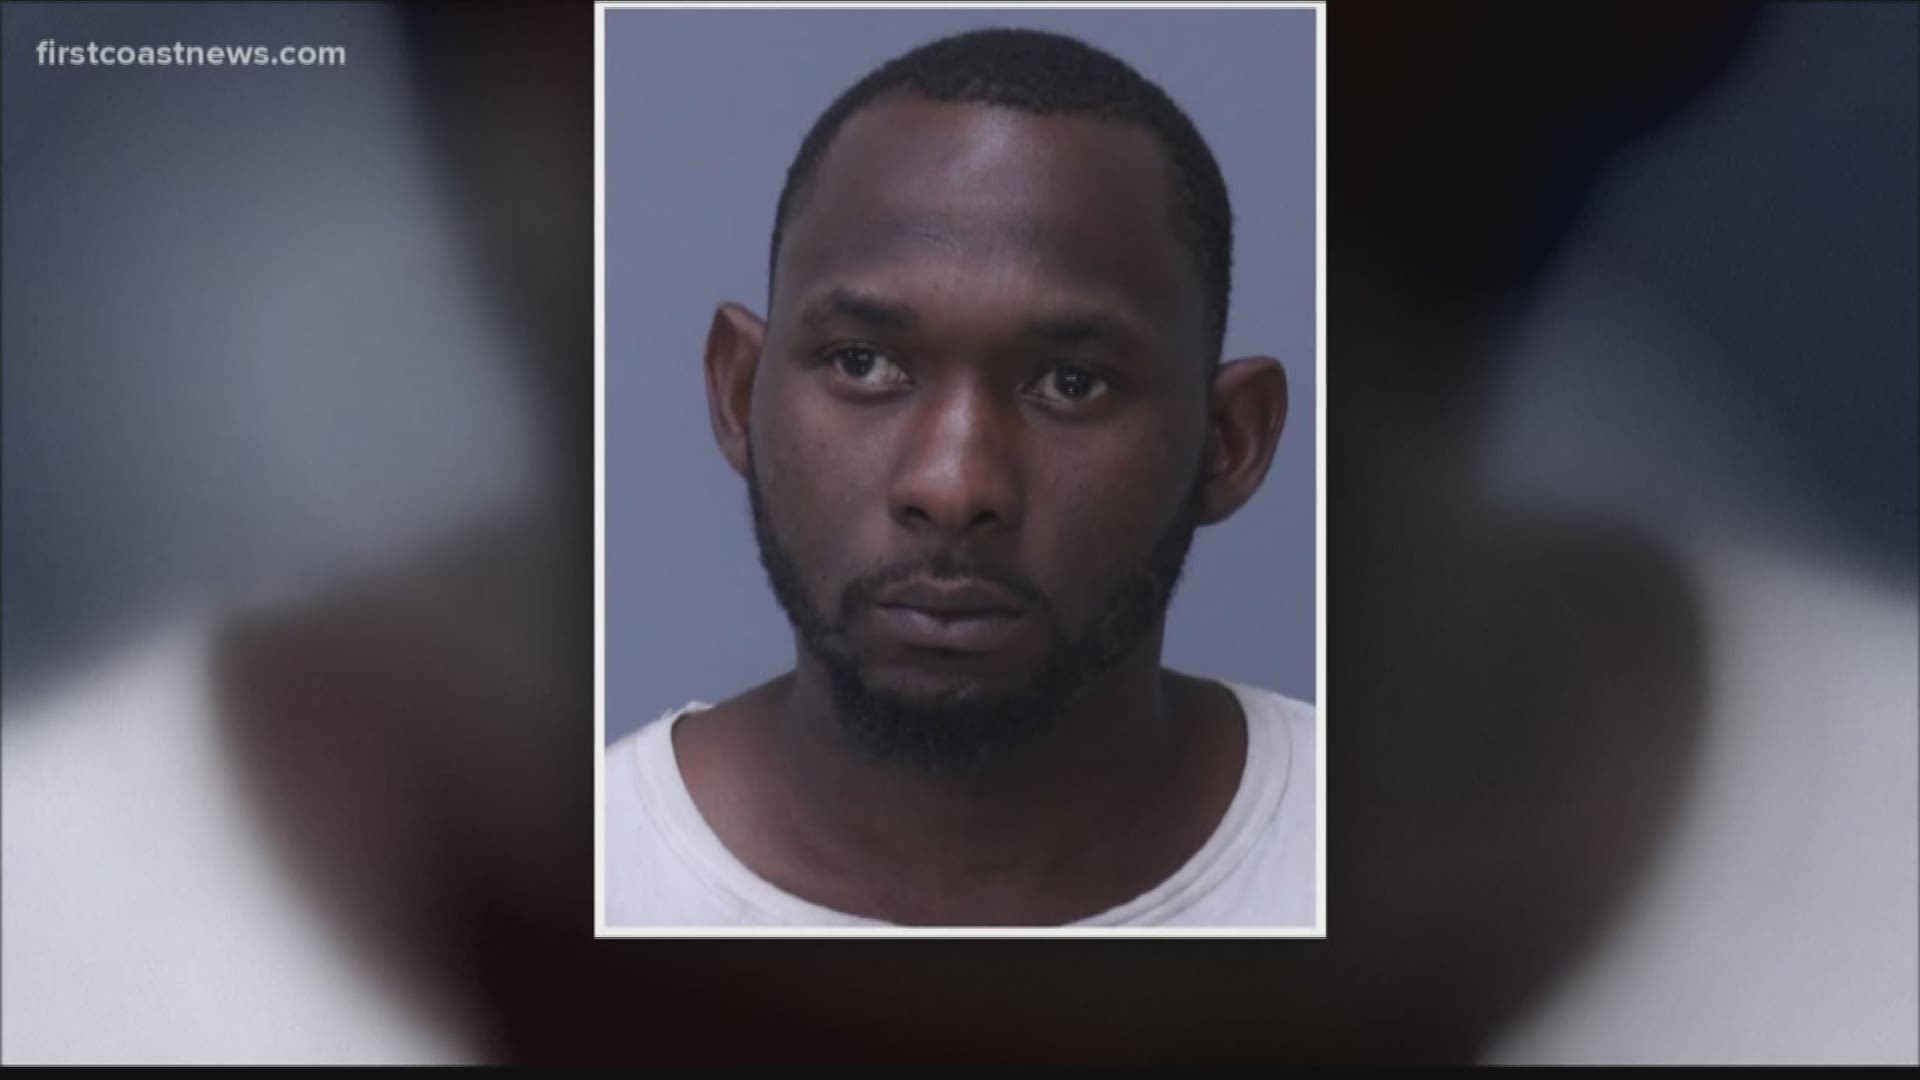 An offense report says the suspect, Darius Kennedy, 26, became irate when employees at the Walmart told him it was too late to return the mattress.